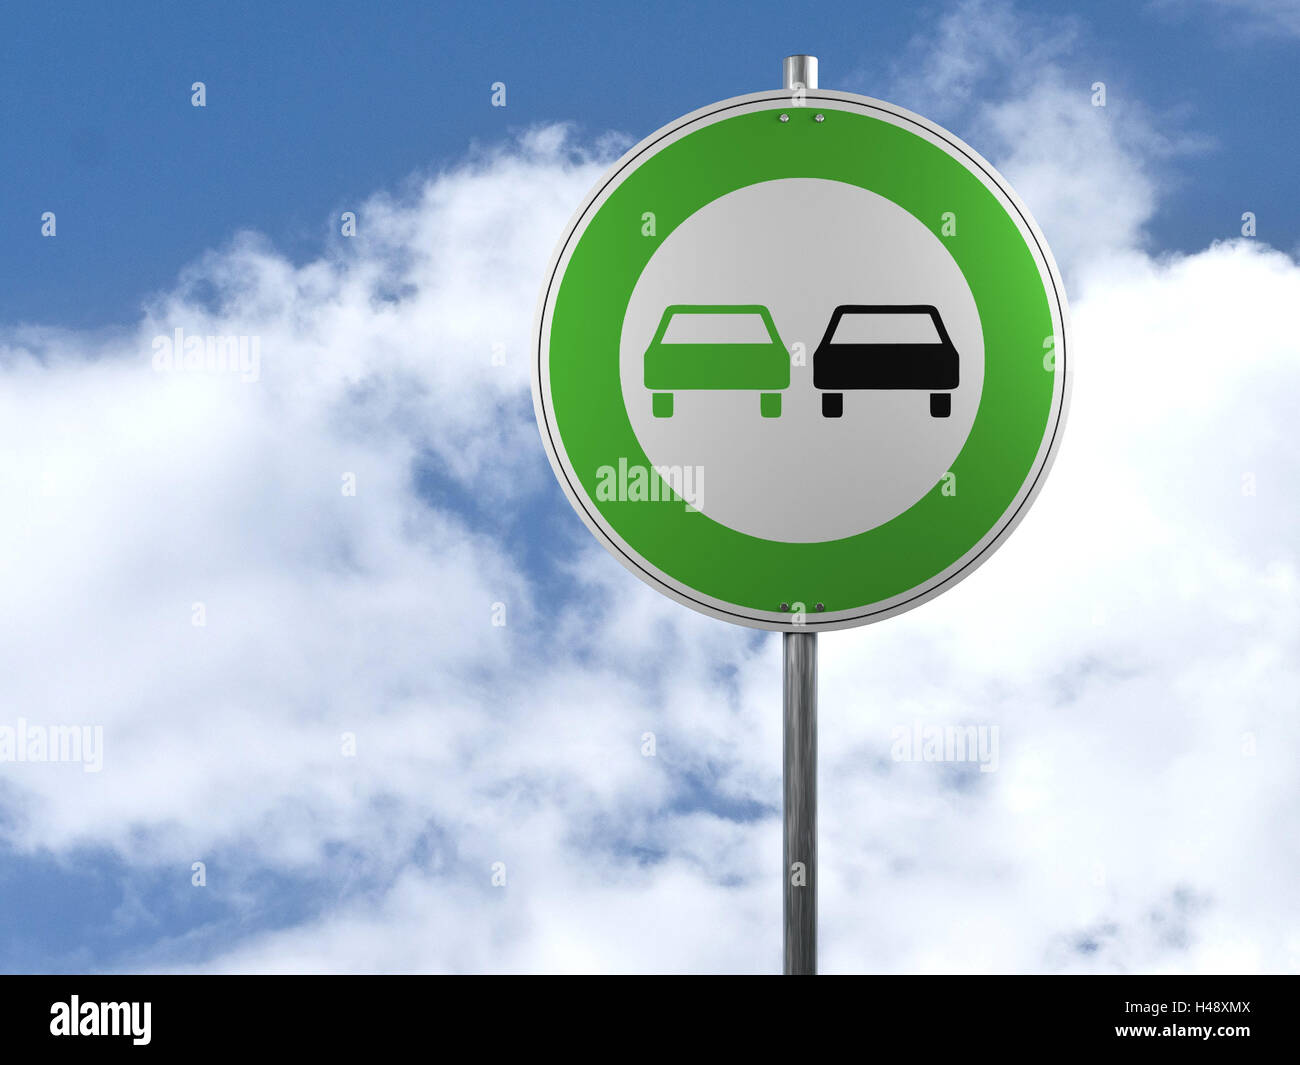 Road sign, environmentally friendly car technology, road sign, green, environmentally friendly, car, computer graphics, sky, clouds, environment, ecologically, progress, icon, symbolically, conception, car technology, Stock Photo